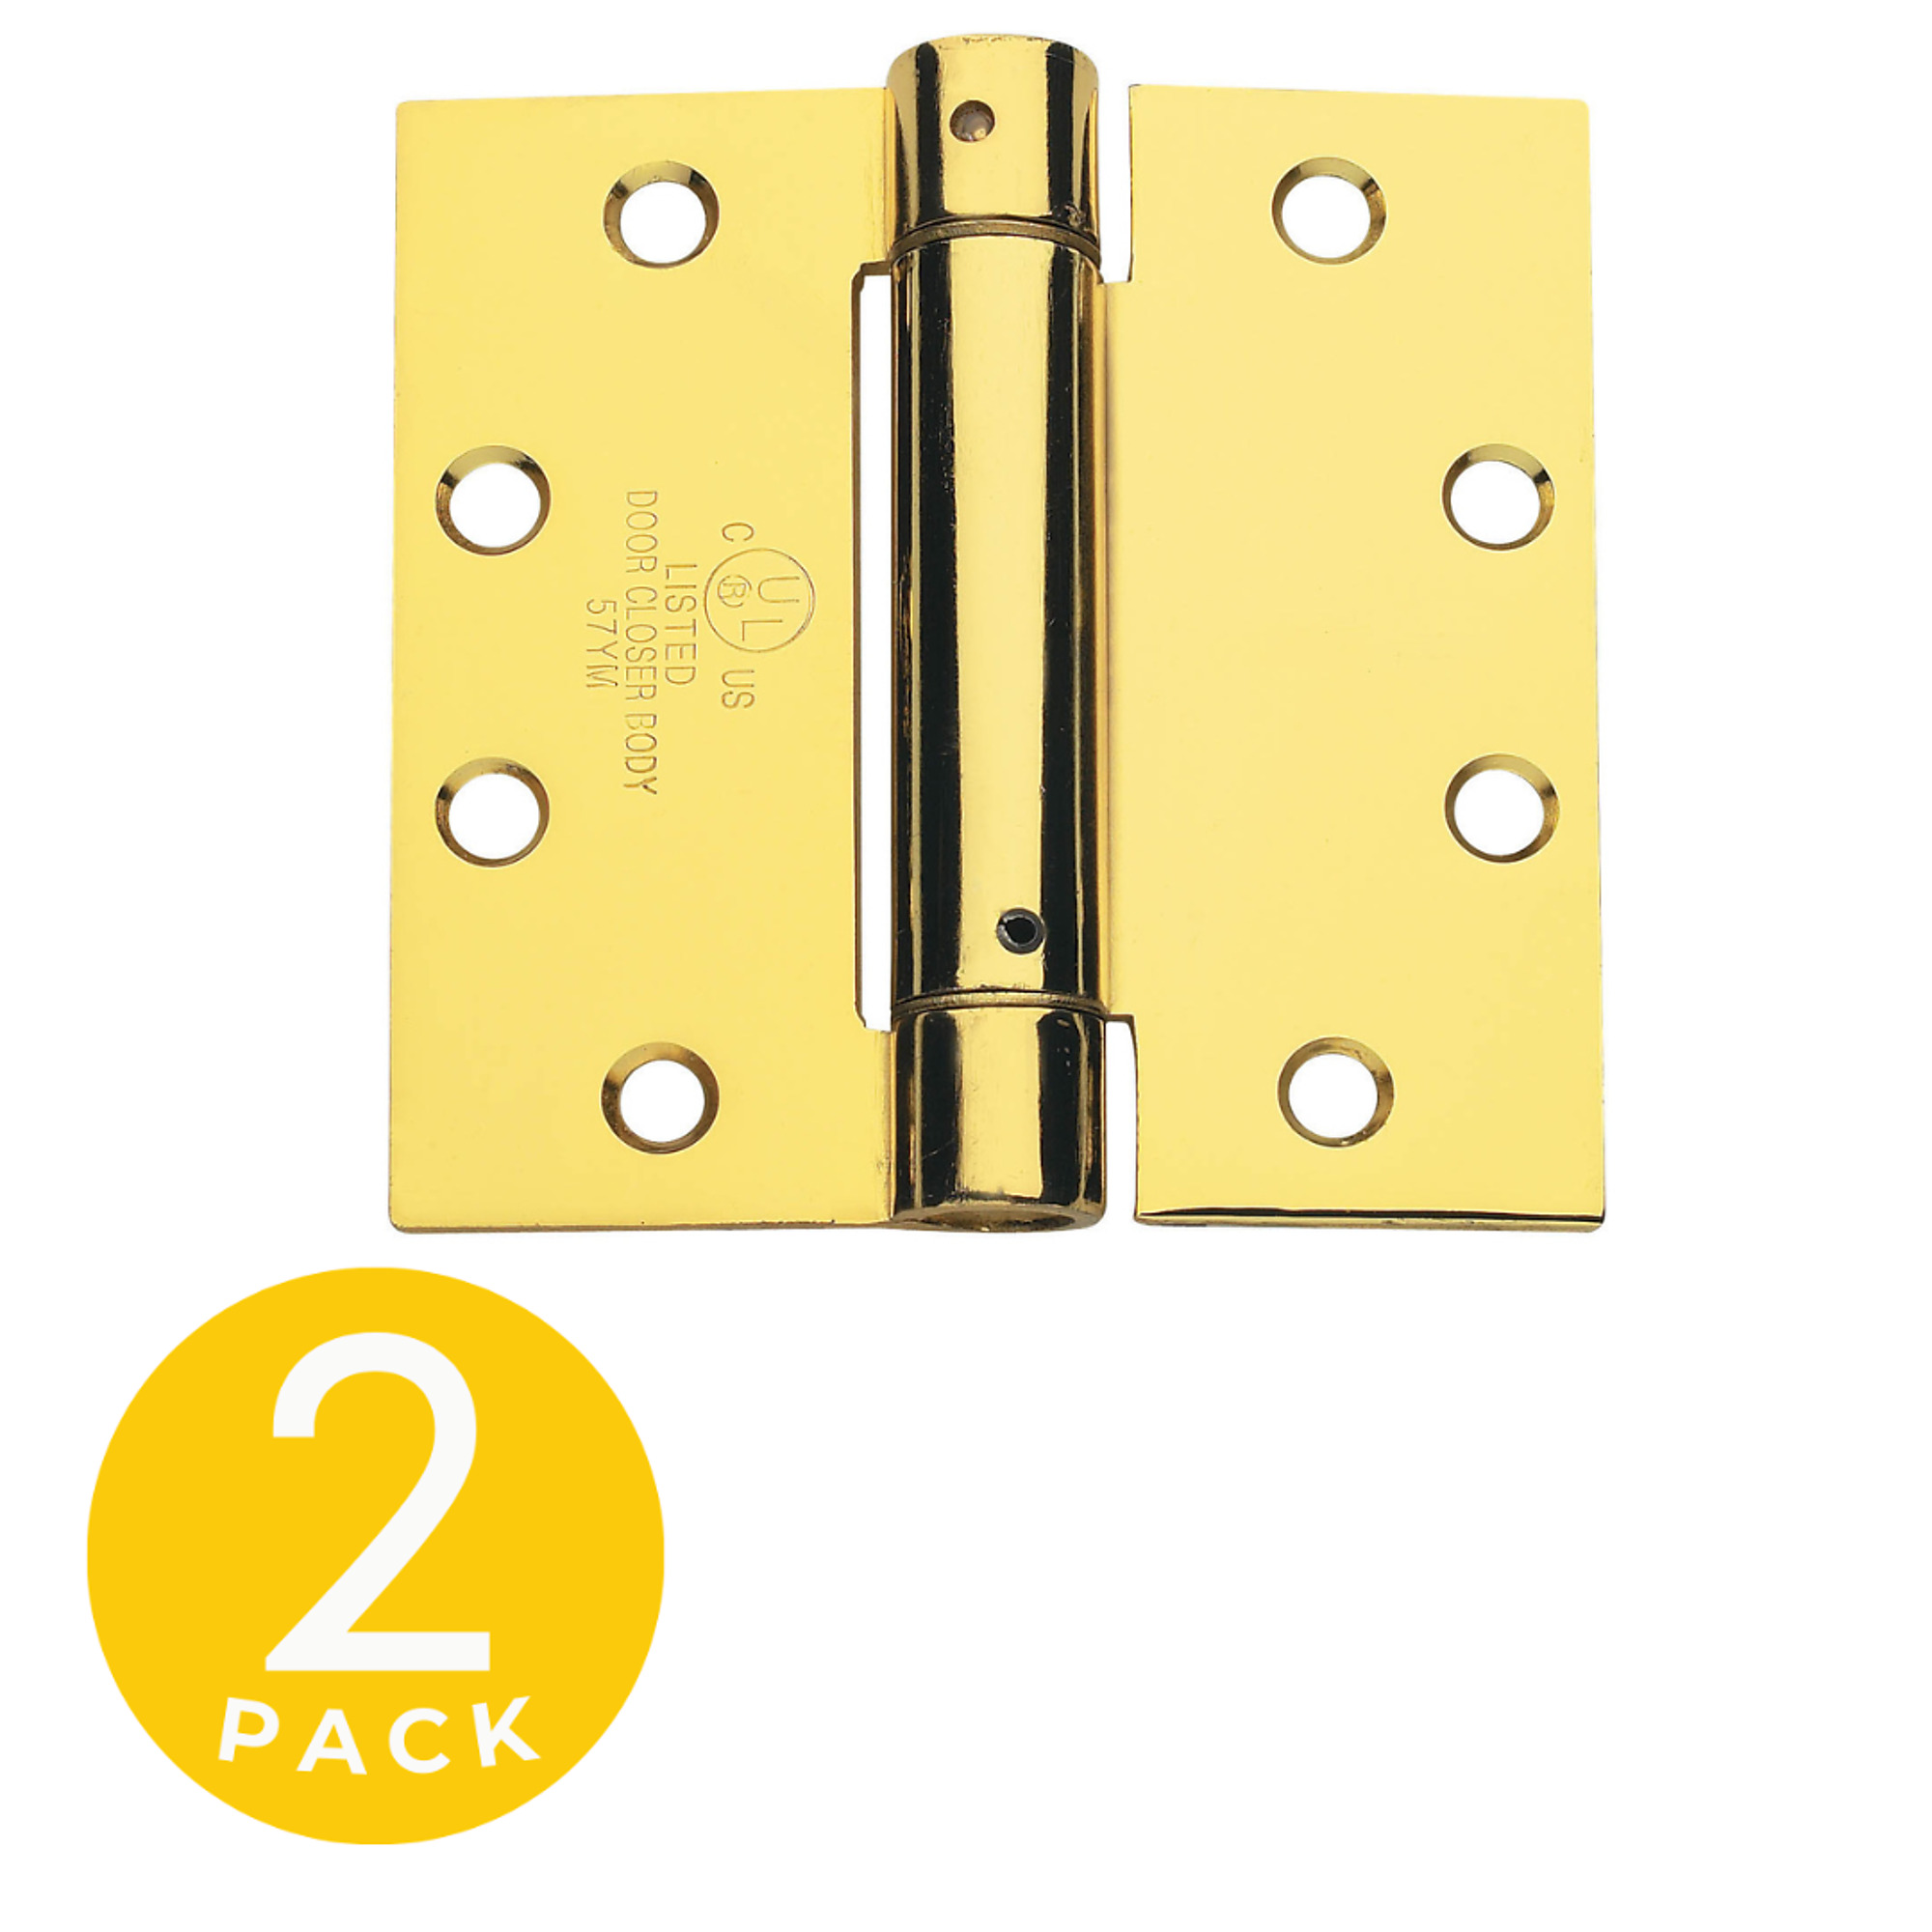 Global Door Controls, 4Inch x 4Inch Full Mortise Spring Squared Hinge - Set of 2 Model CPS4040-US3-M